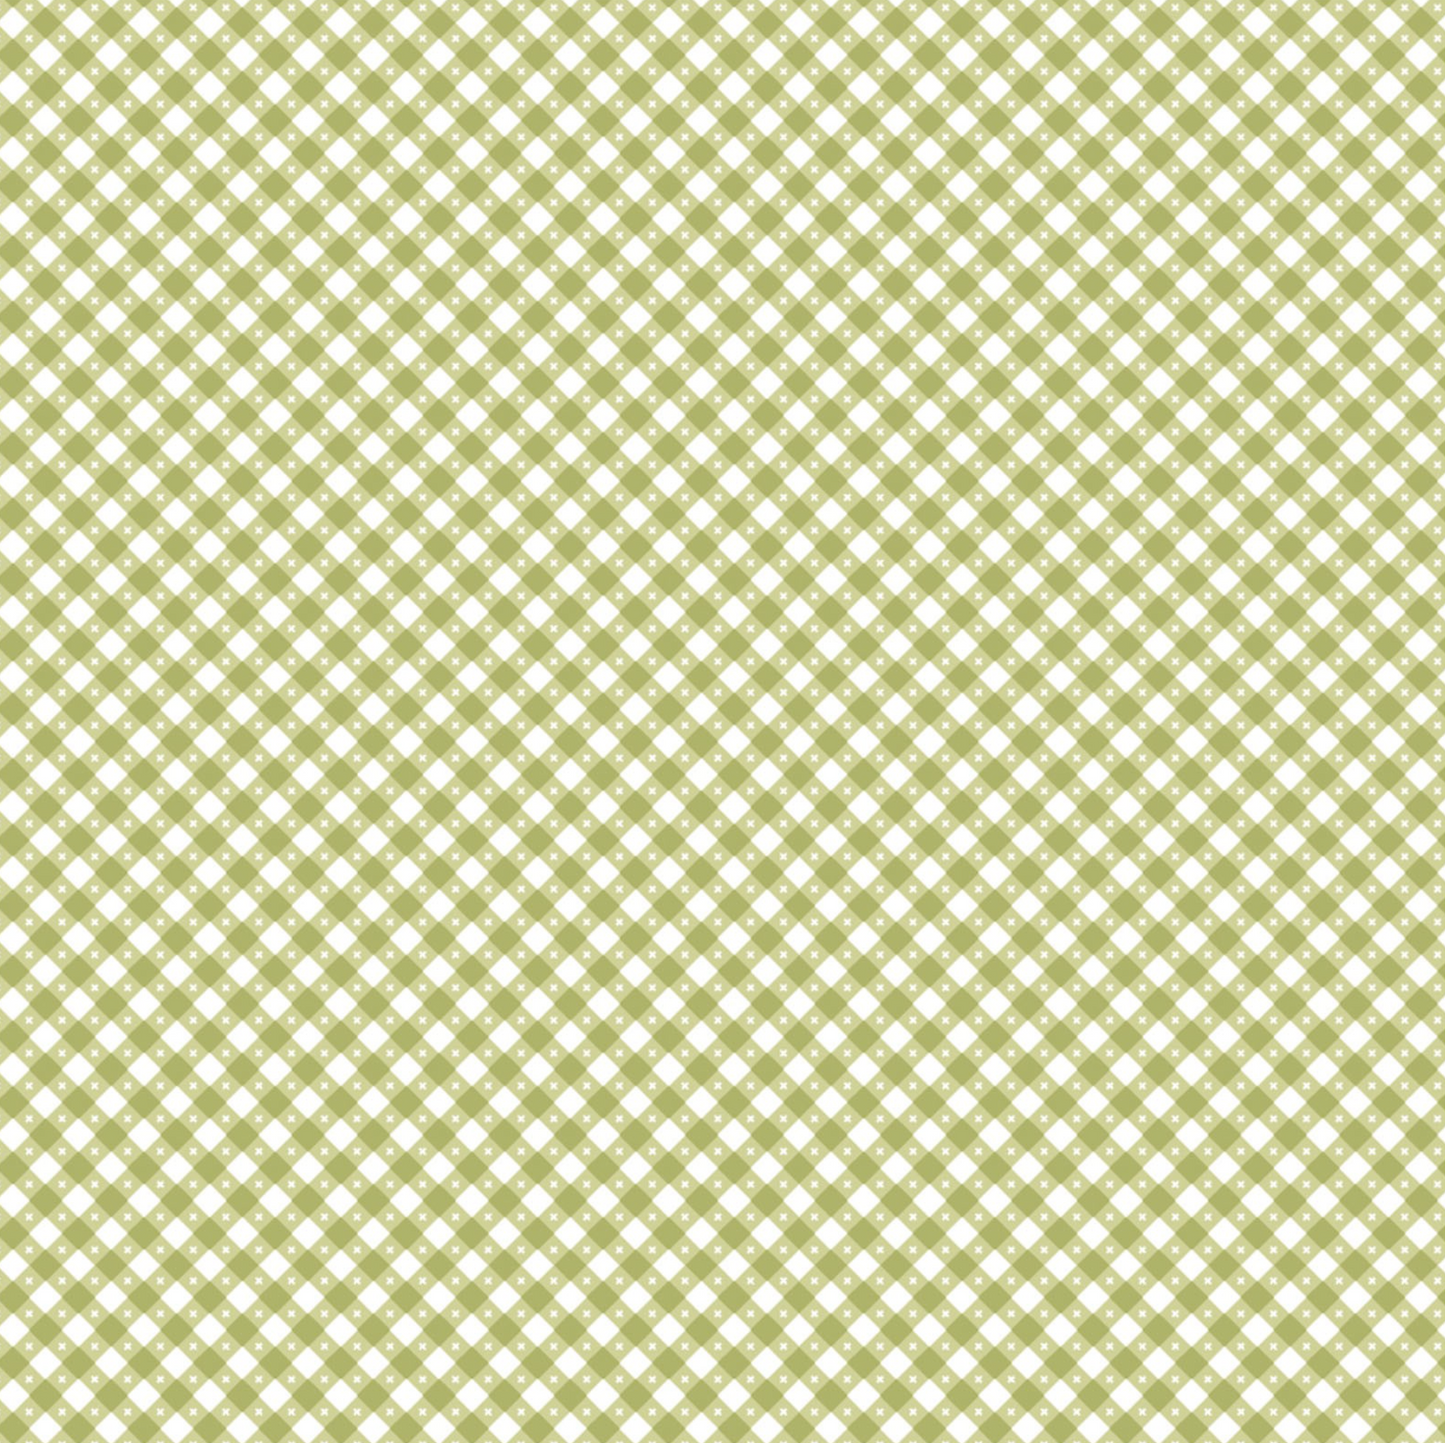 Gingham Picnic Green Grass GP21214, sold by the 1/2 yard